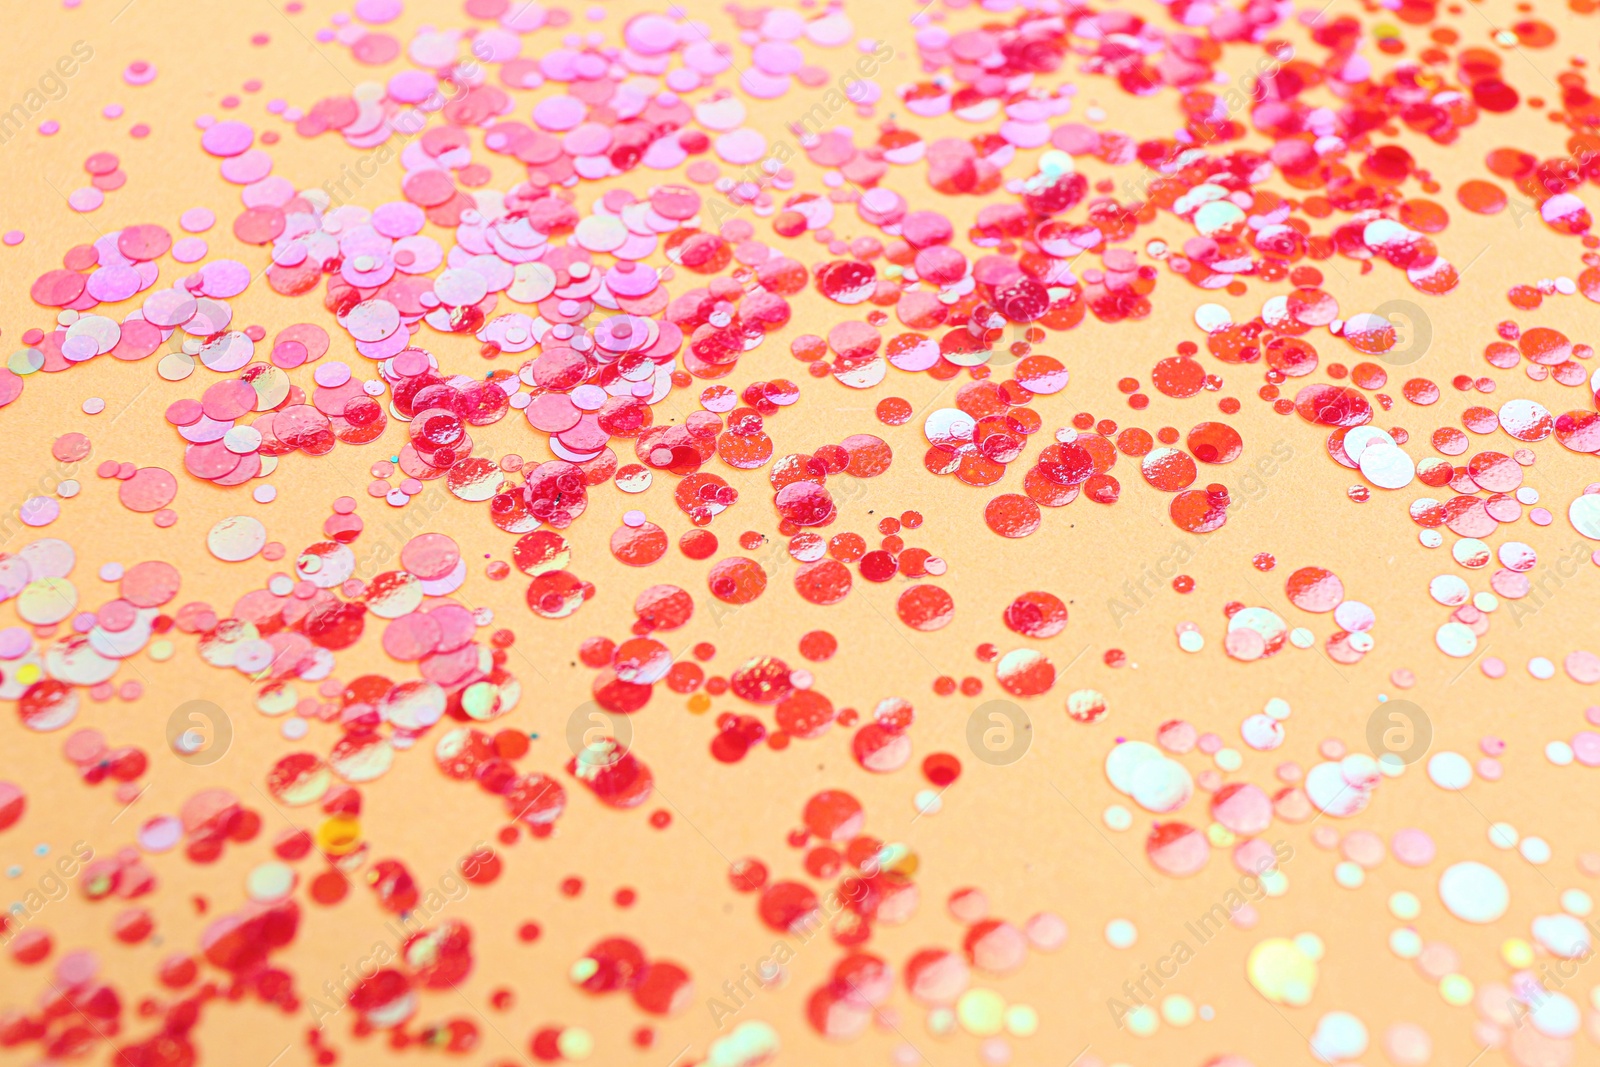 Photo of Shiny bright red glitter on beige background